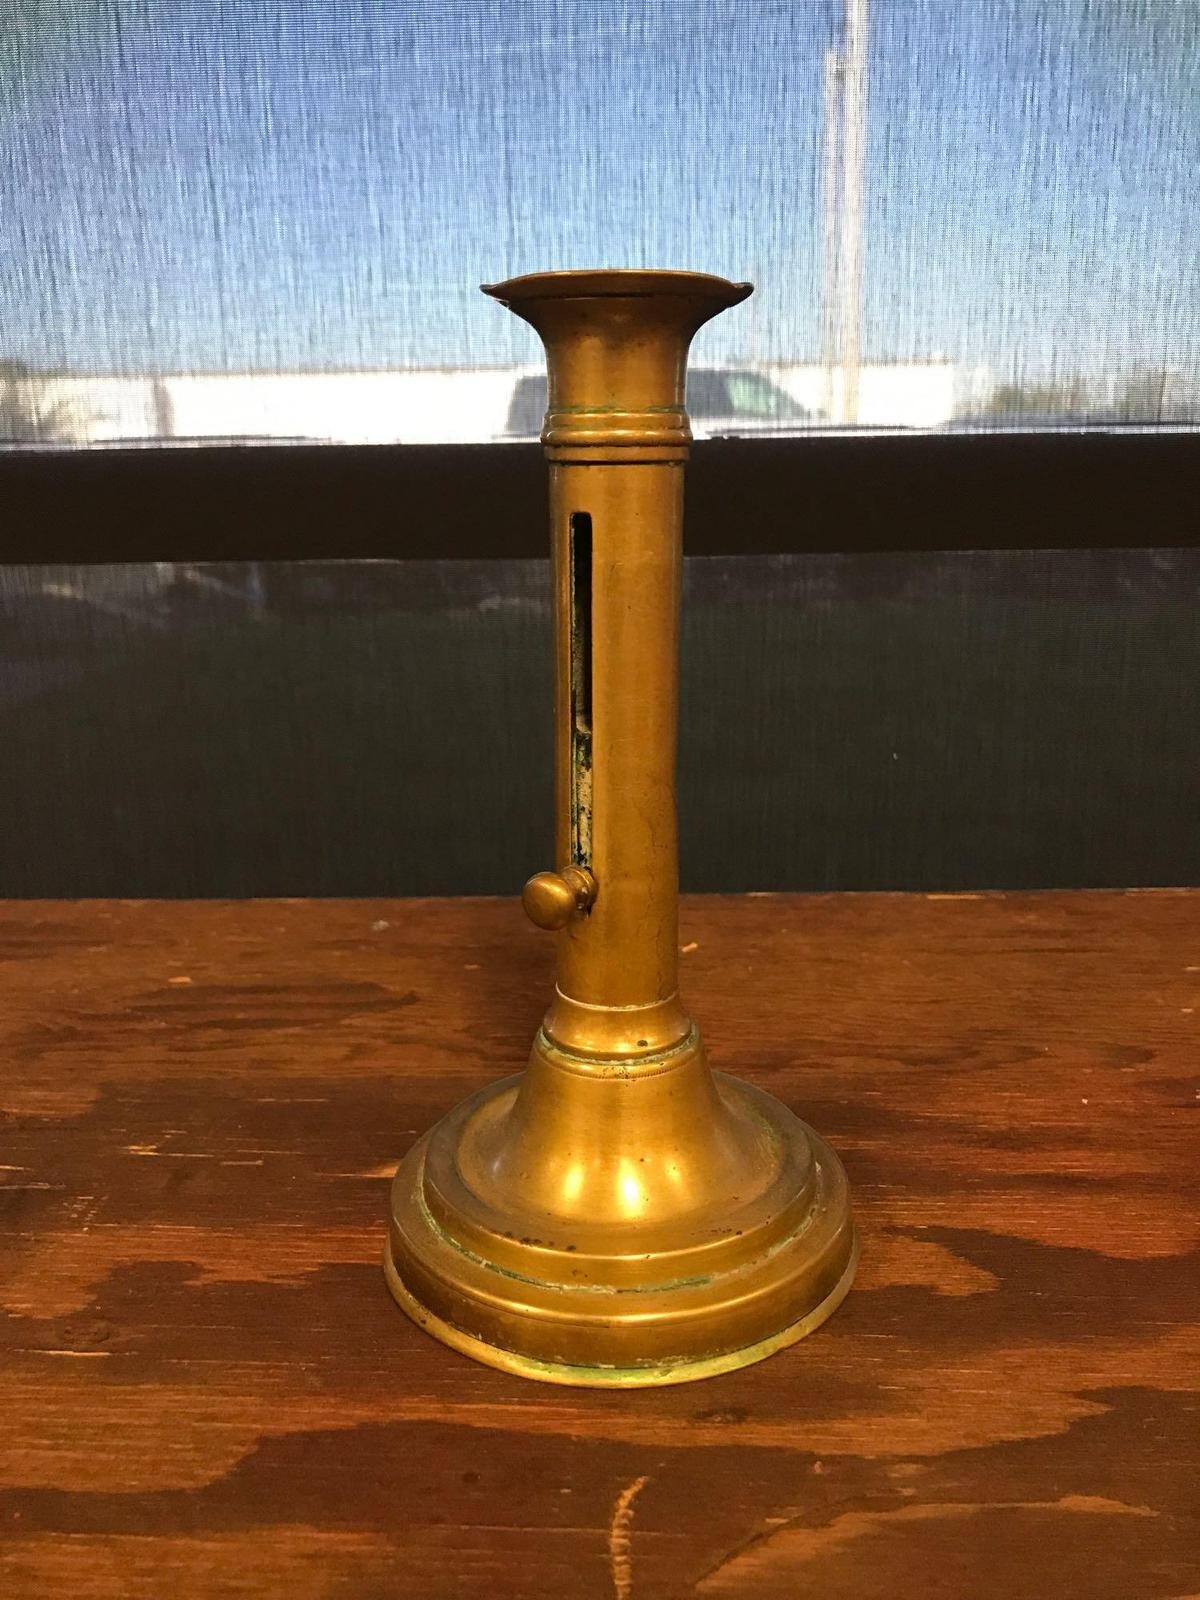 Antique brass candlestick with lever